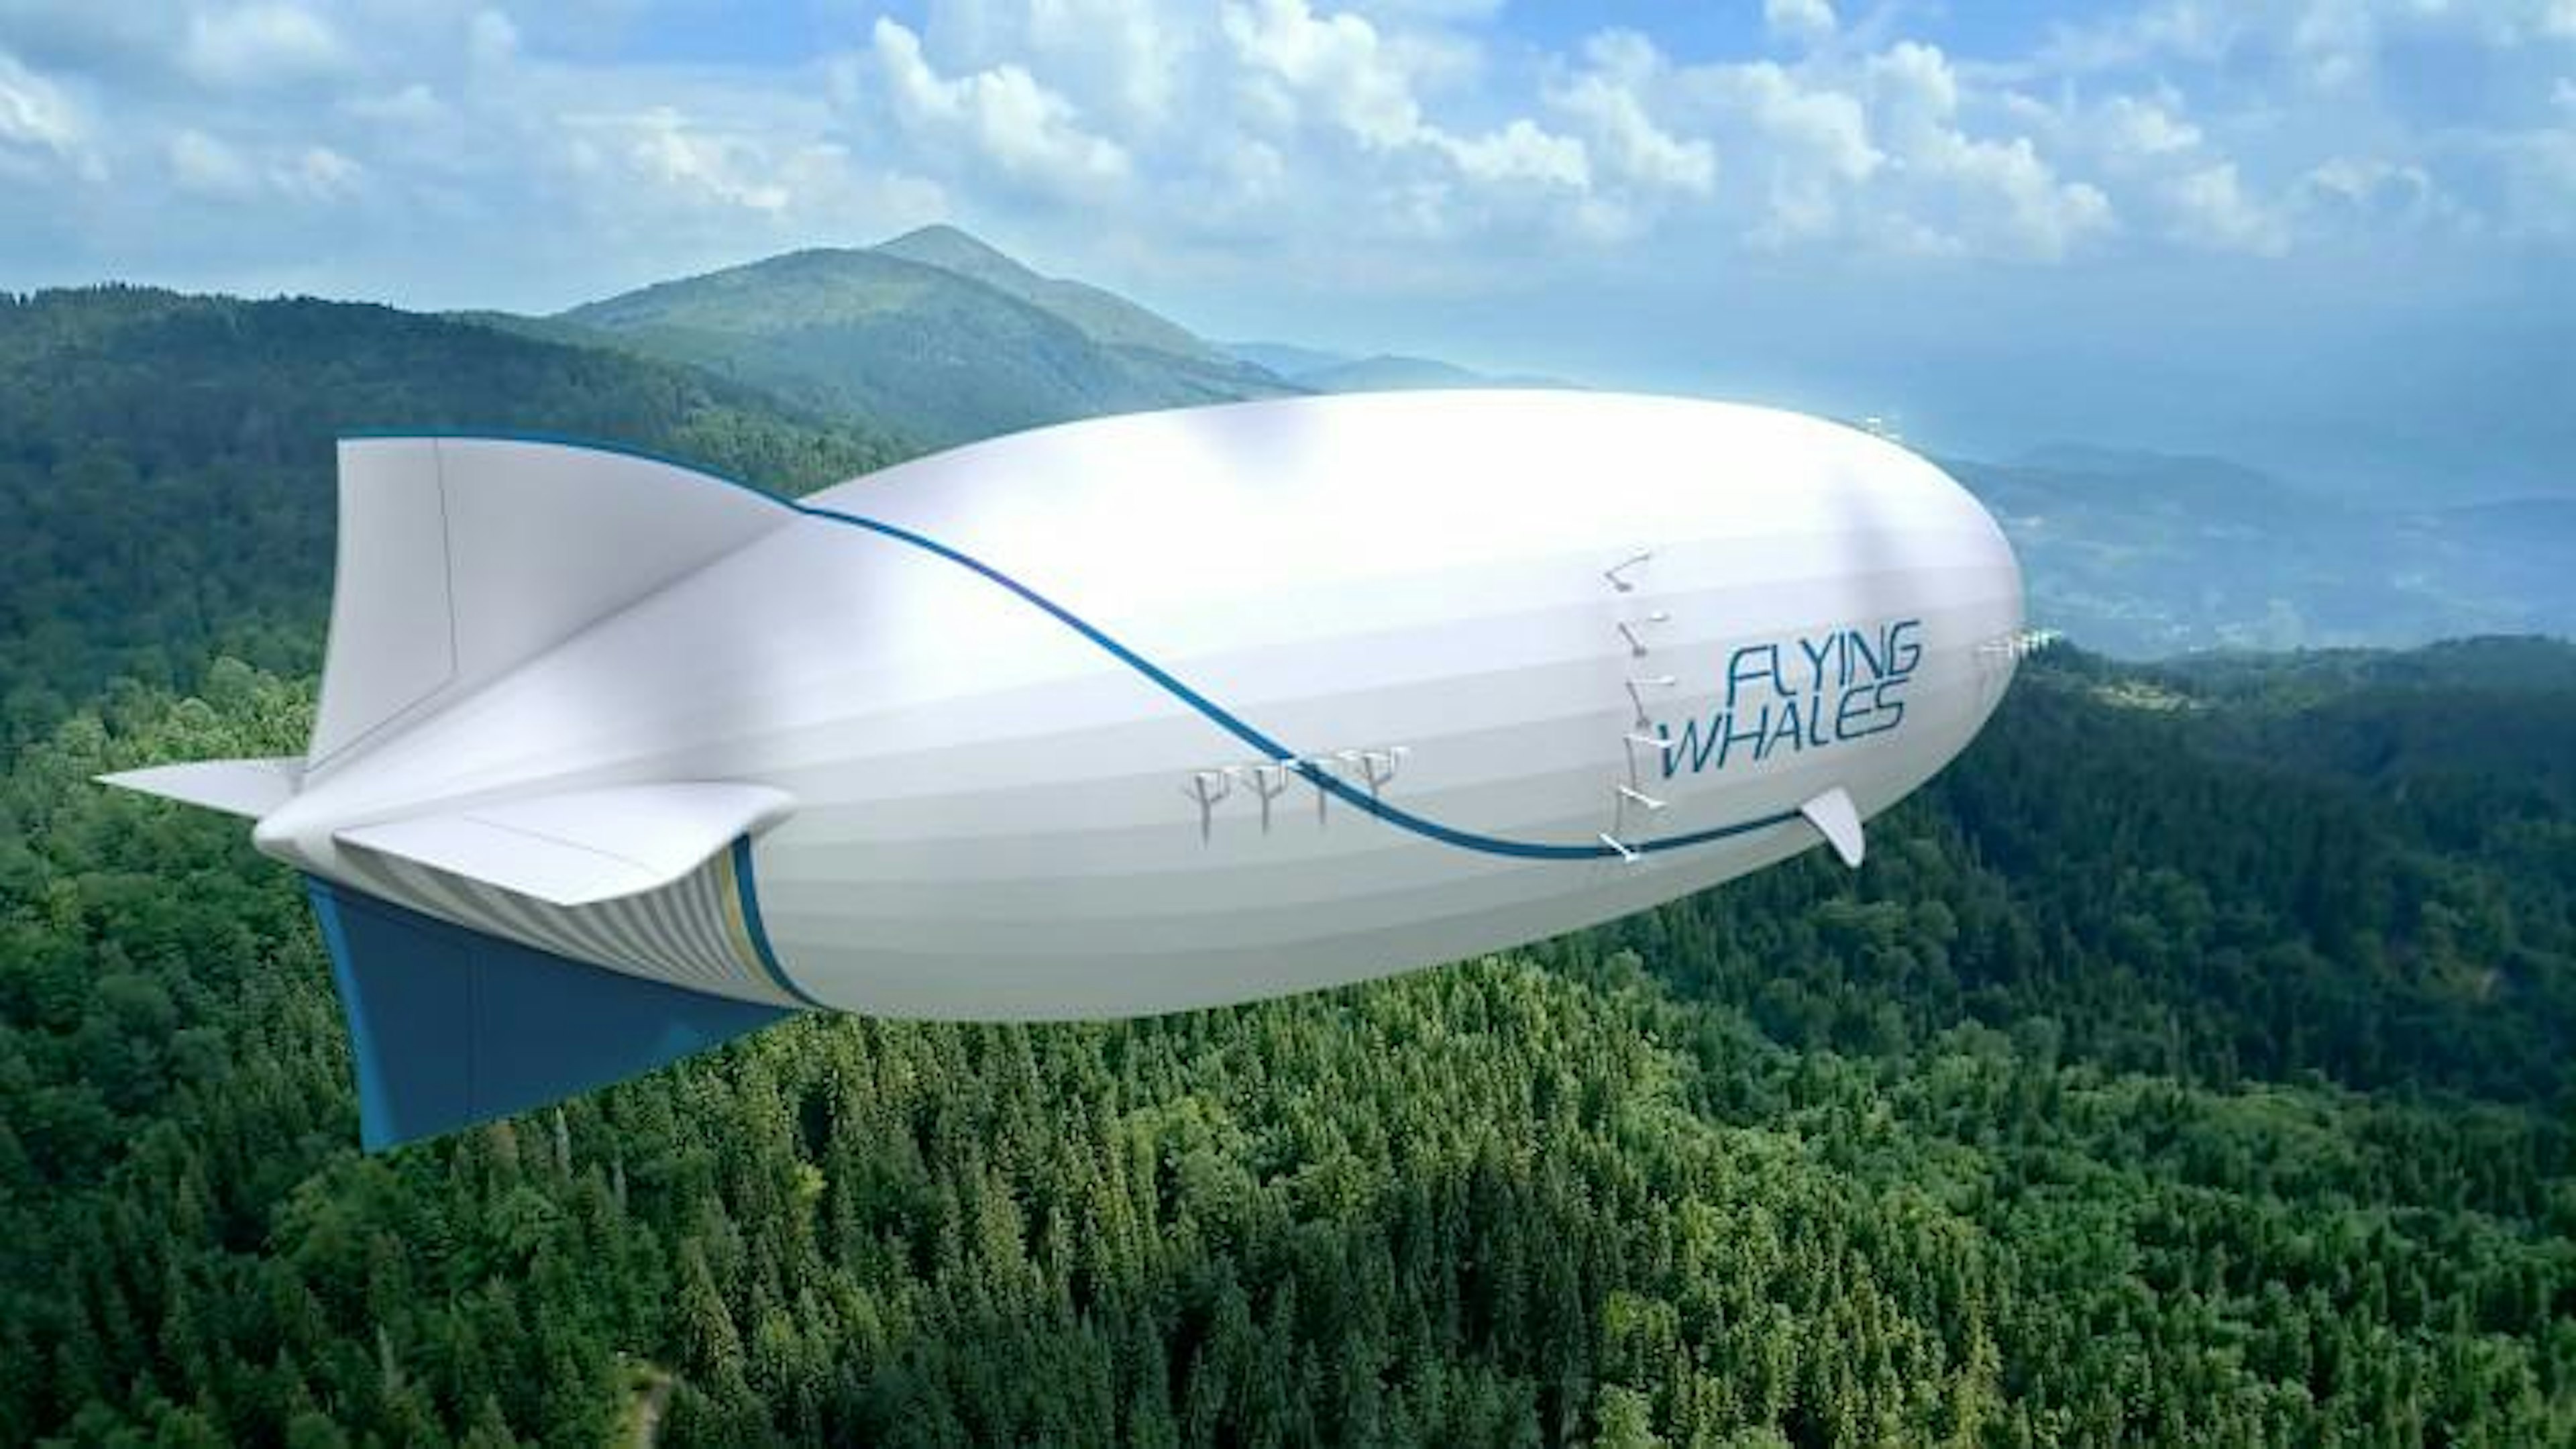 Flying Whales is developing a cargo transport airship